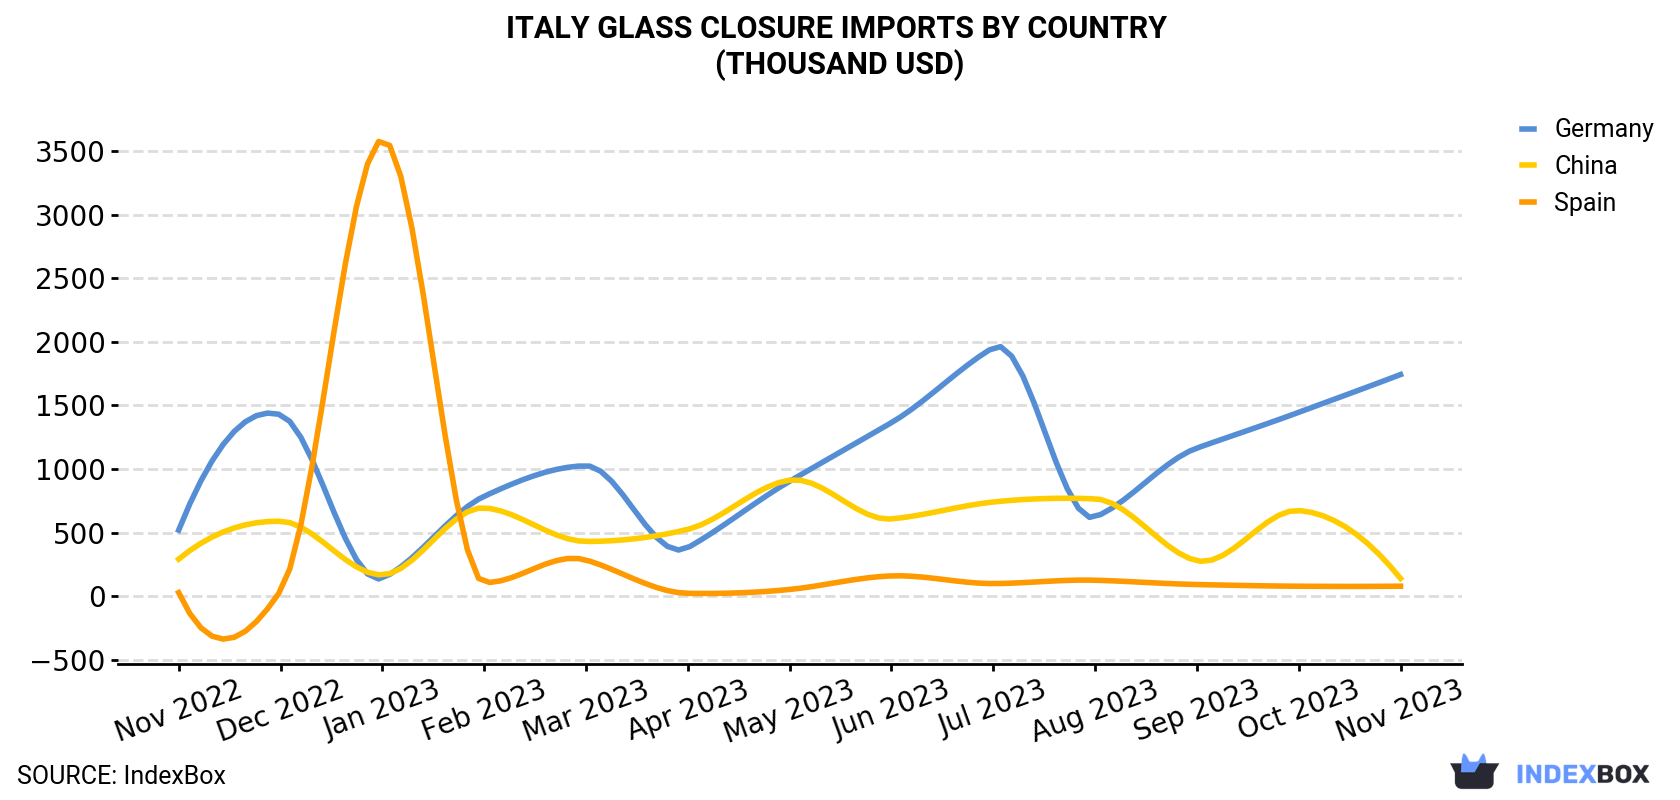 Italy Glass Closure Imports By Country (Thousand USD)